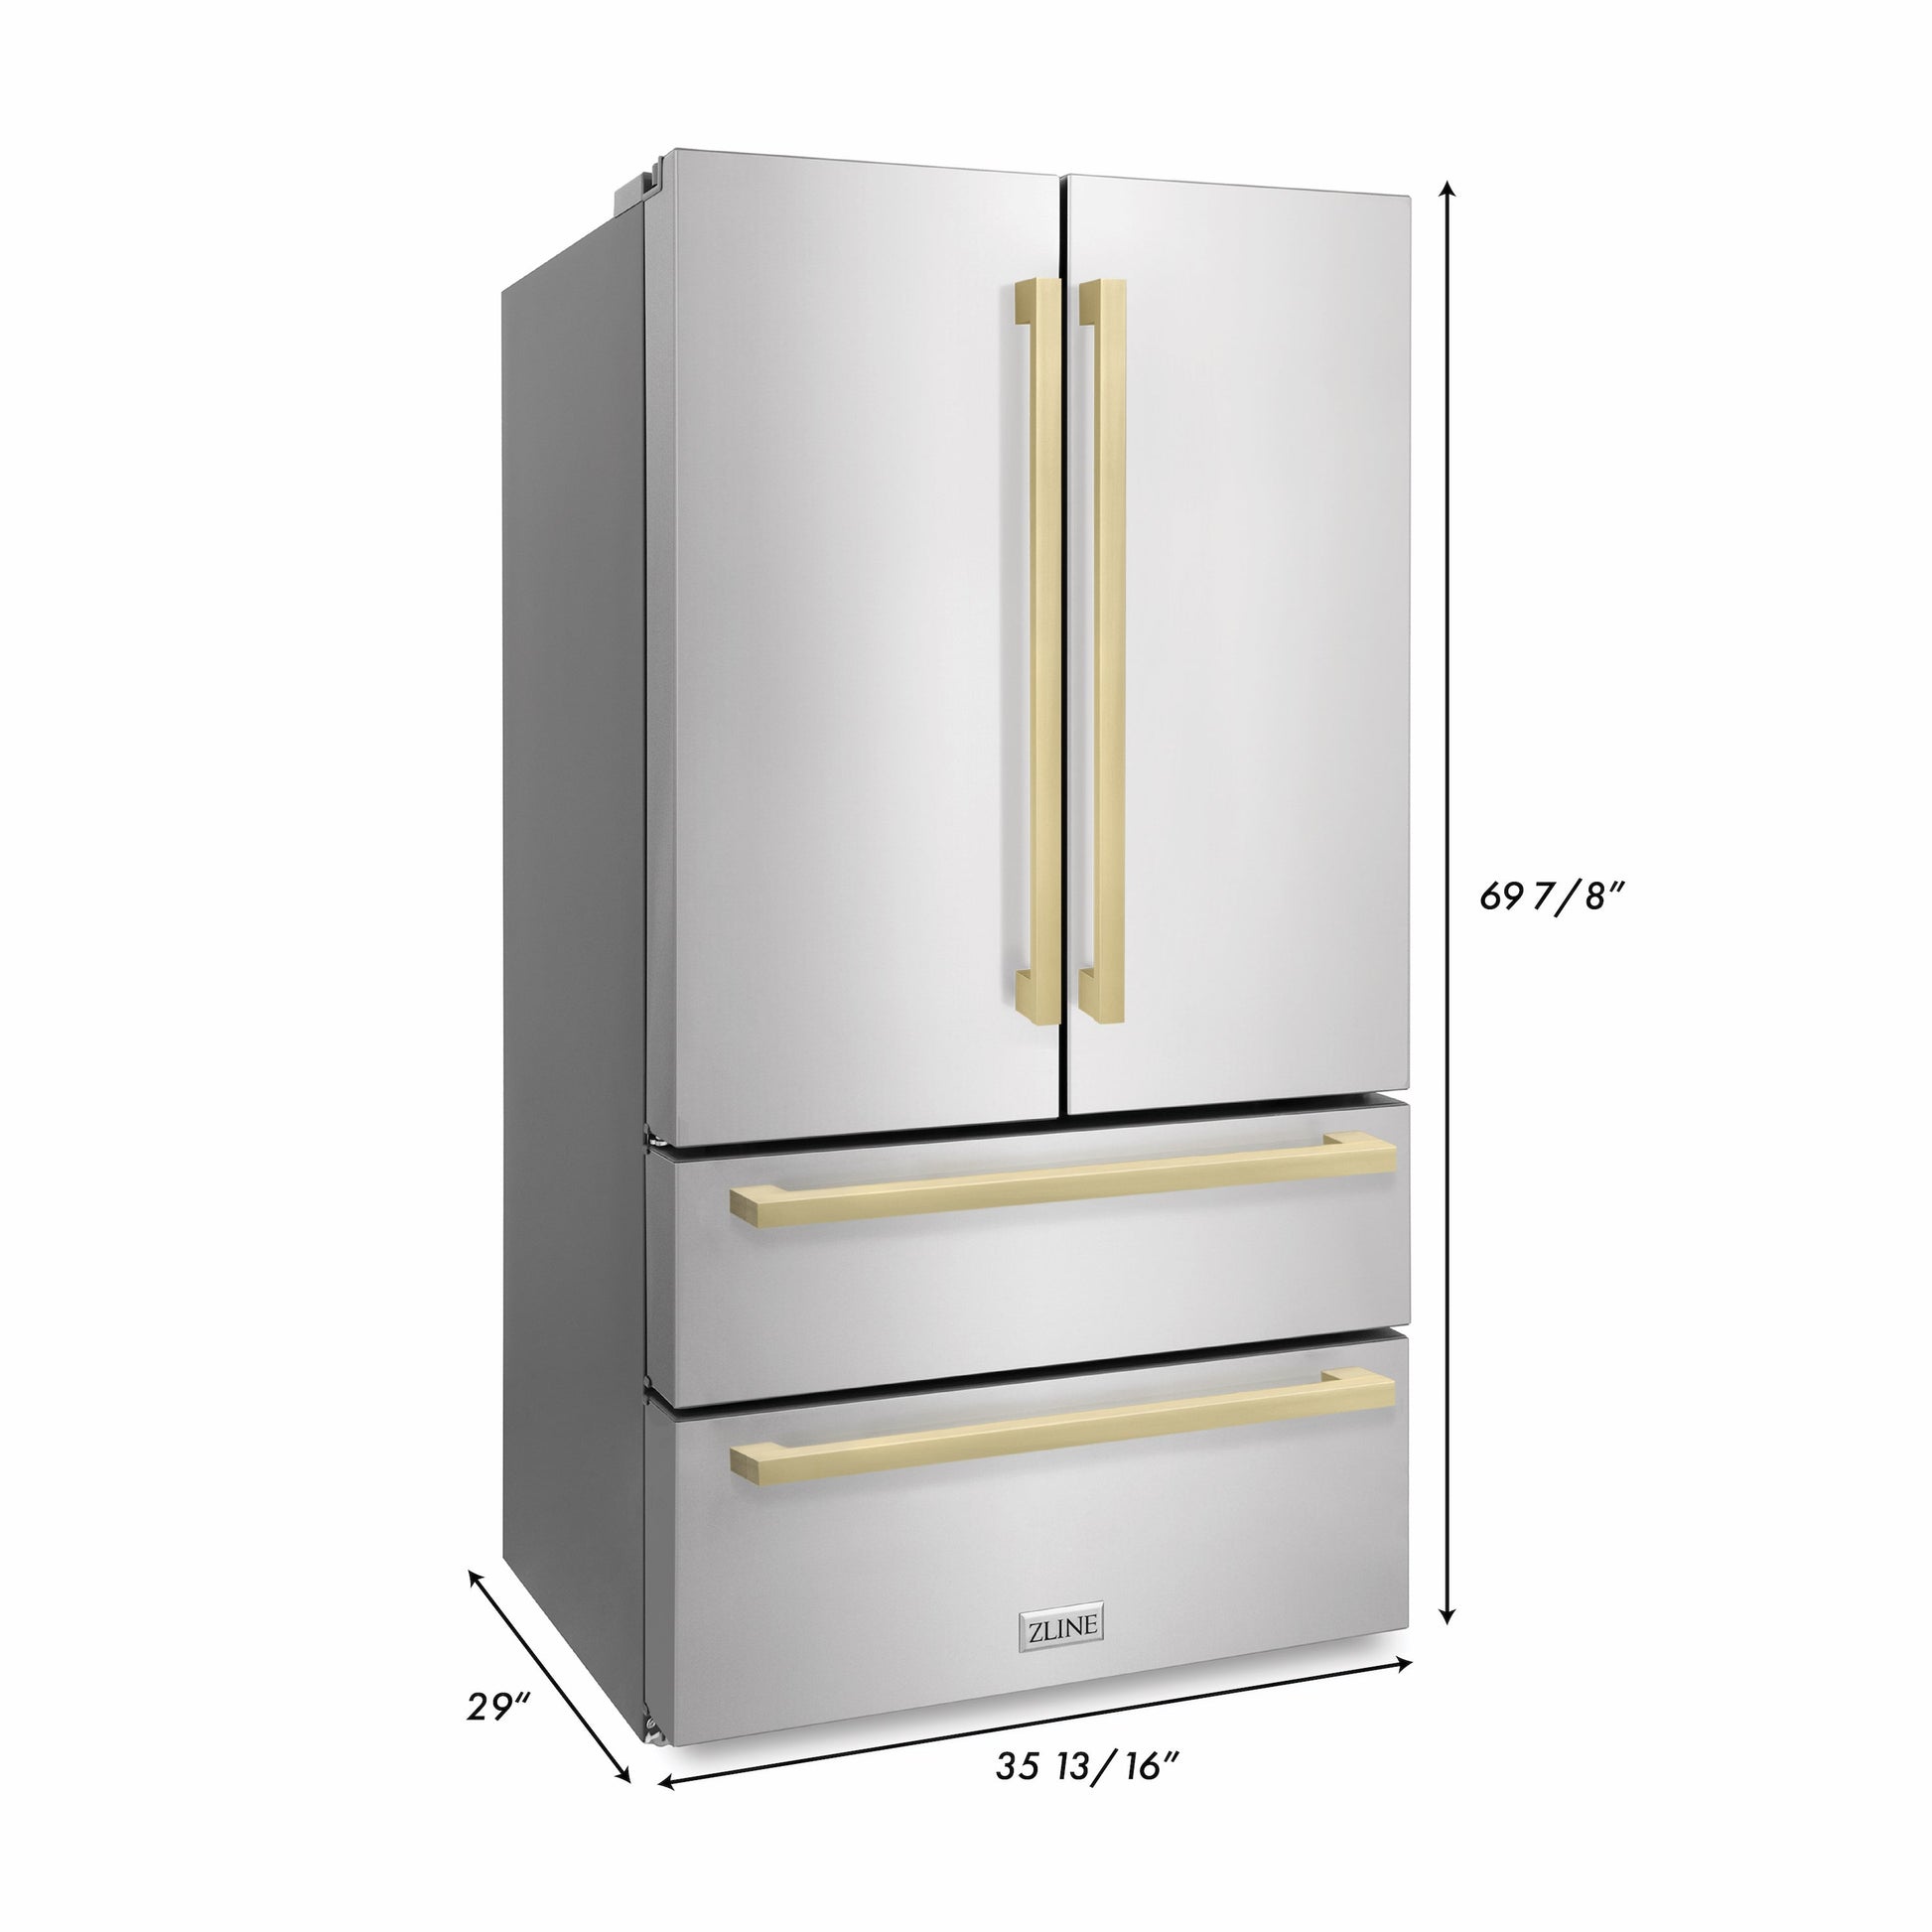 ZLINE 36" Autograph Edition 4-Door French Door Refrigerator with Ice Maker - Stainless Steel with Champagne Bronze Square Handles